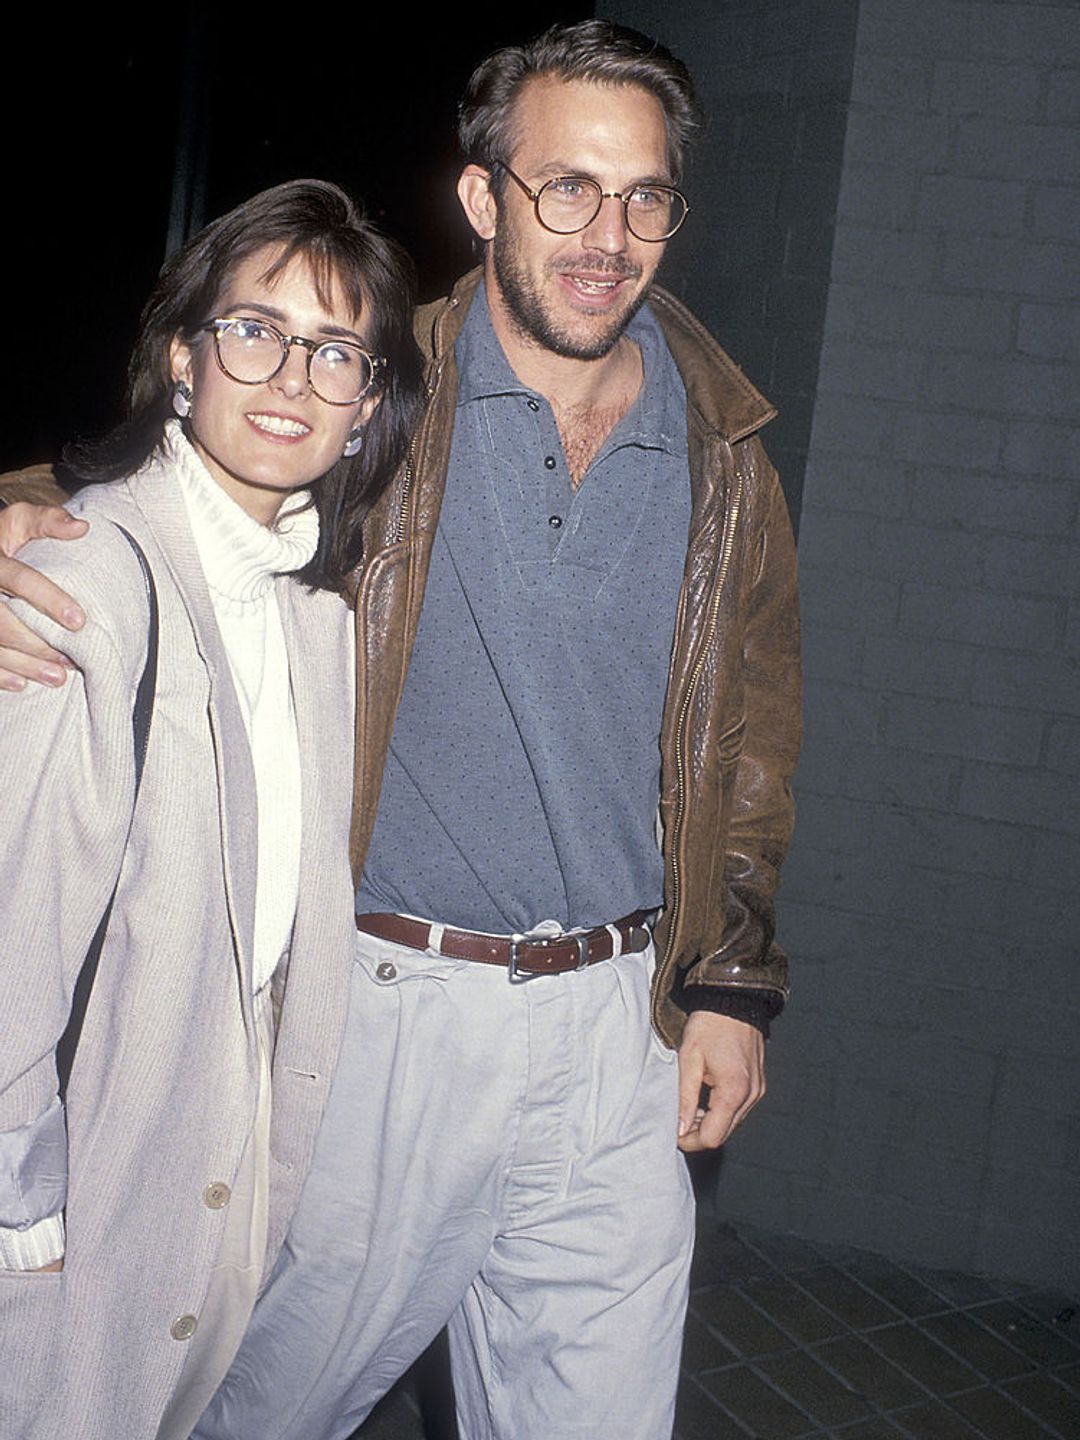 Actor Kevin Costner and wife Cindy Costner attend a performance of the play "Hurlyburly" on January 13, 1989